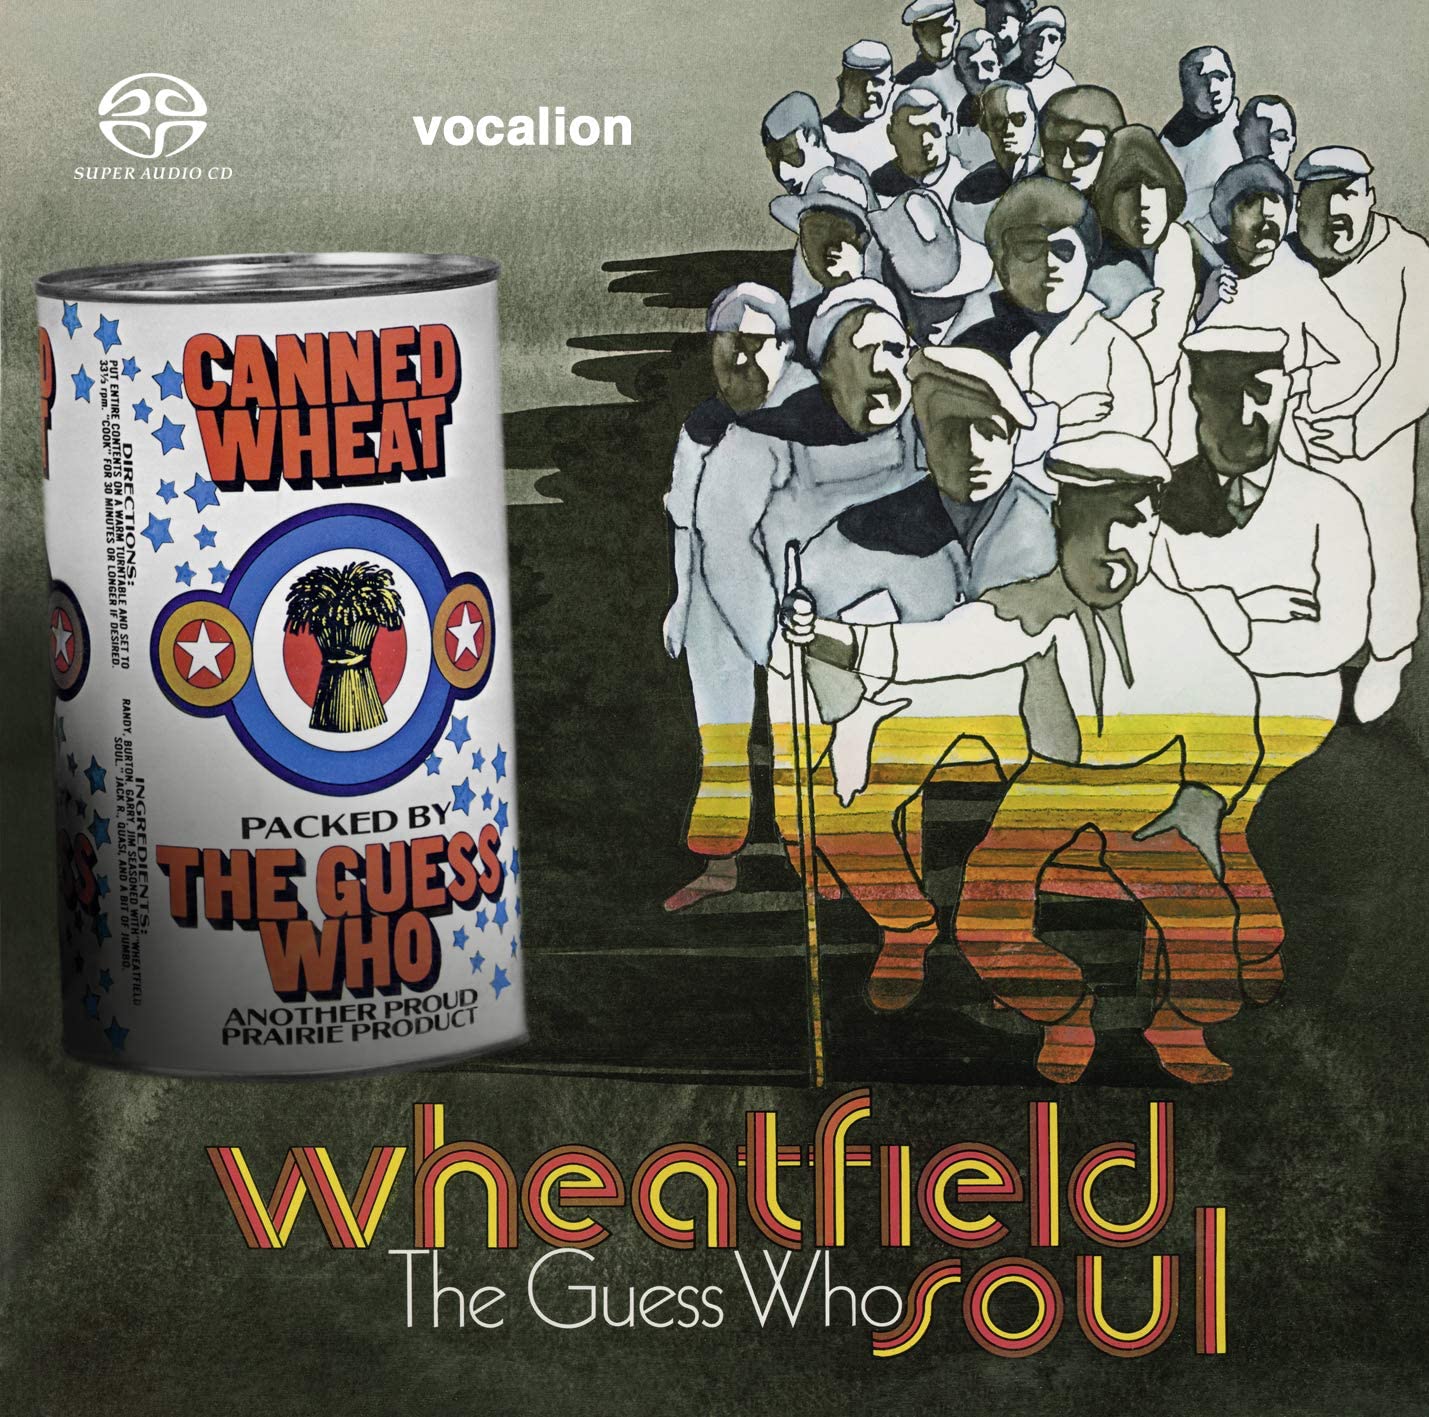 The Guess Who - Wheatfield Soul & Canned Wheat (1969) [Reissue 2019] MCH SACD ISO + FLAC 24bit/96kHz